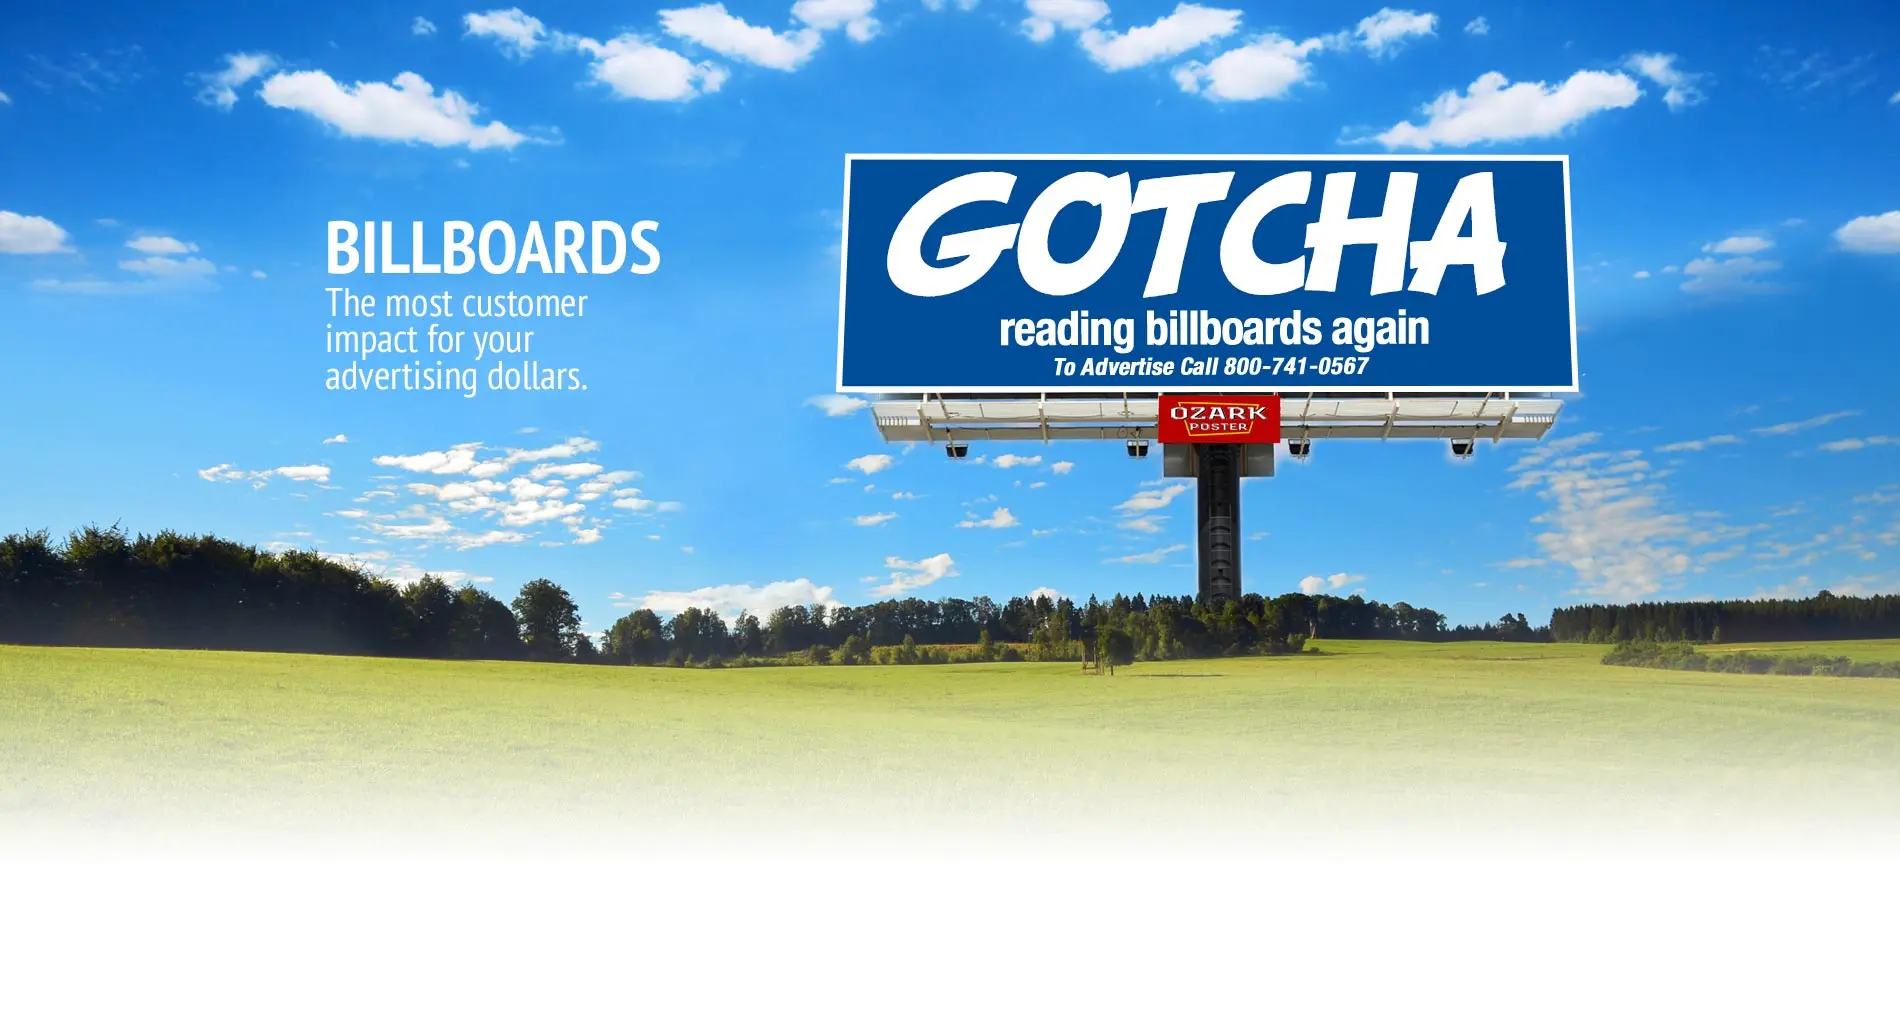 Billboards - The most customer impact for your advertising dollar...